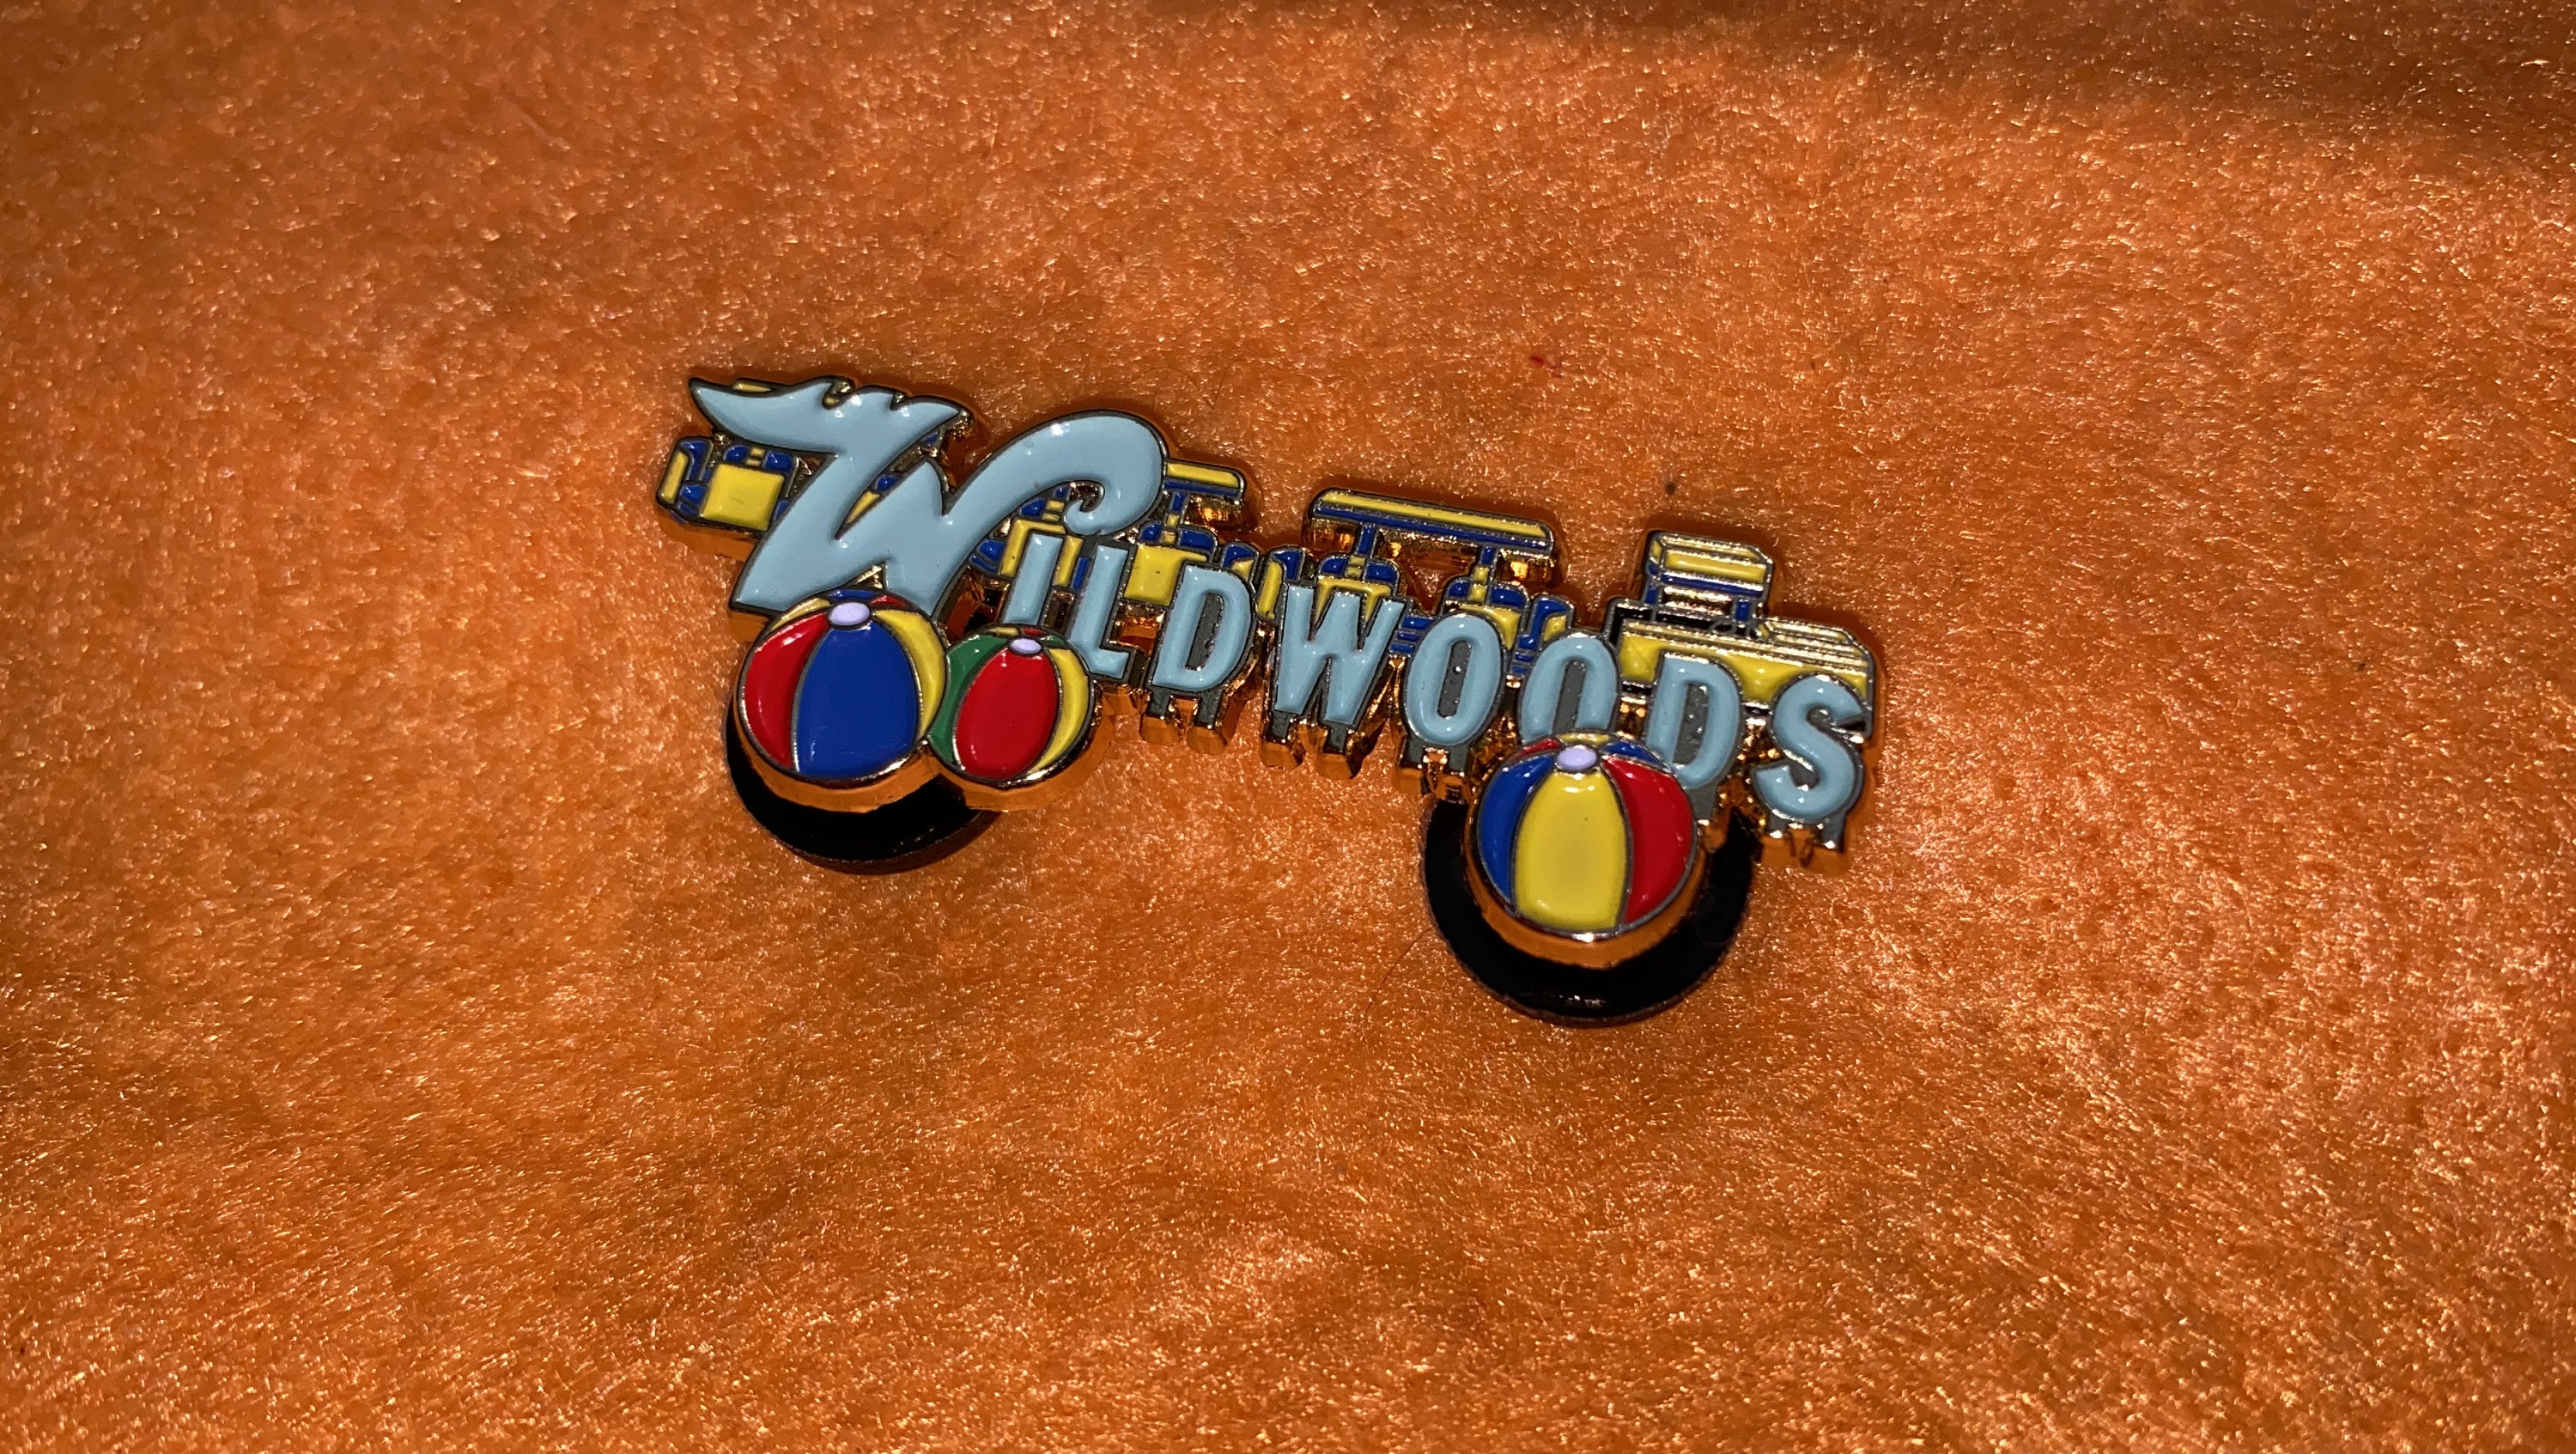 The Wildwood Sign with Beach Balls and Tram Car -  New Zealand